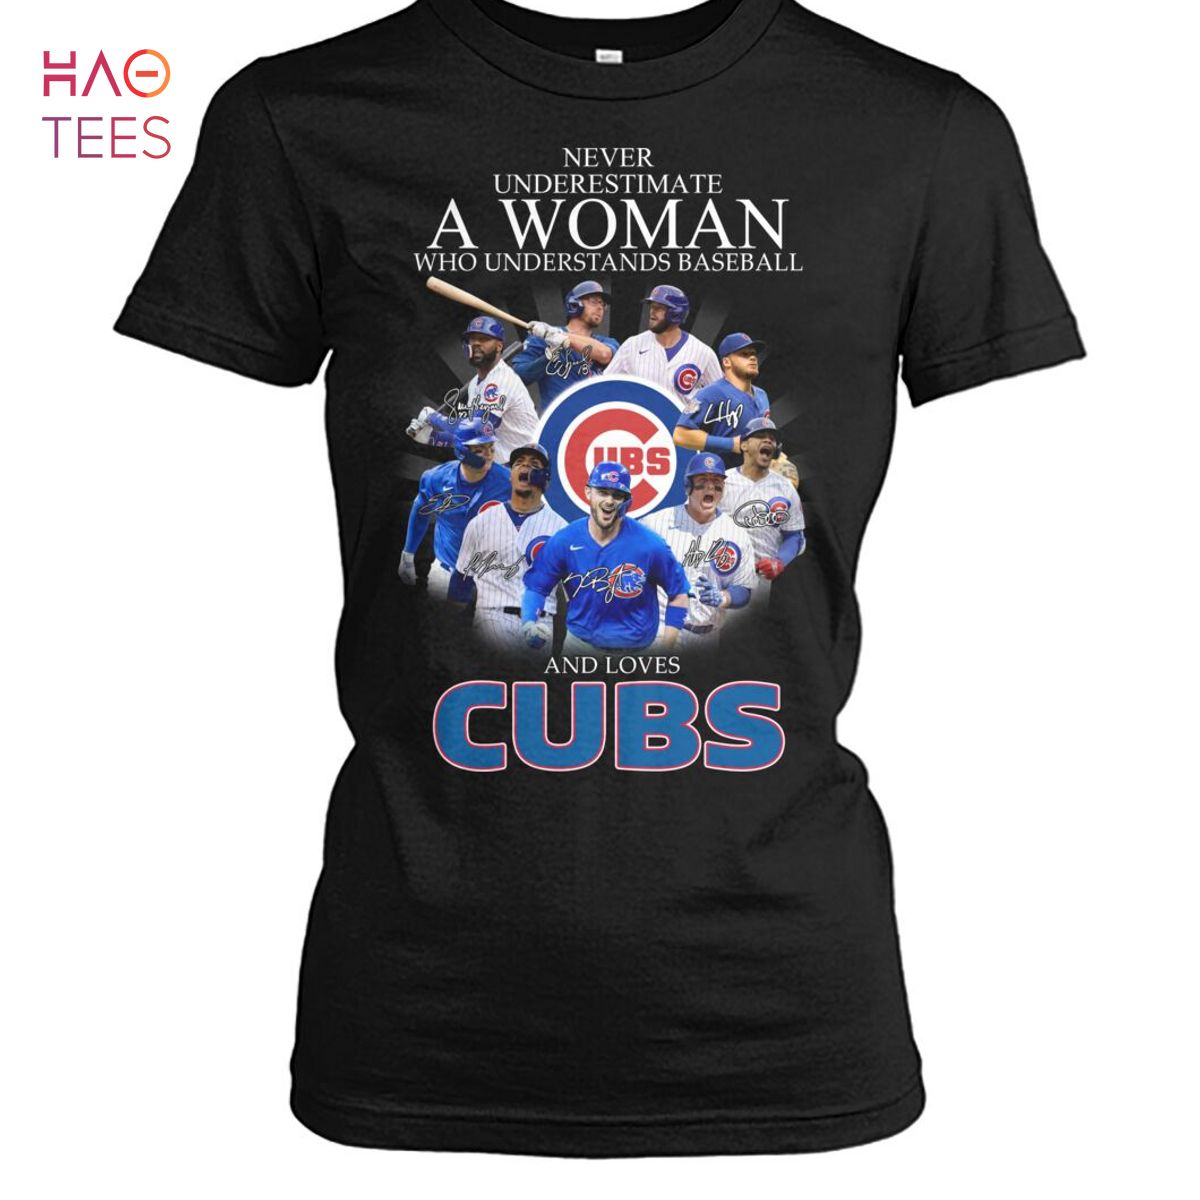 THE BEST Cubs Baseball Shirt Limited Edition